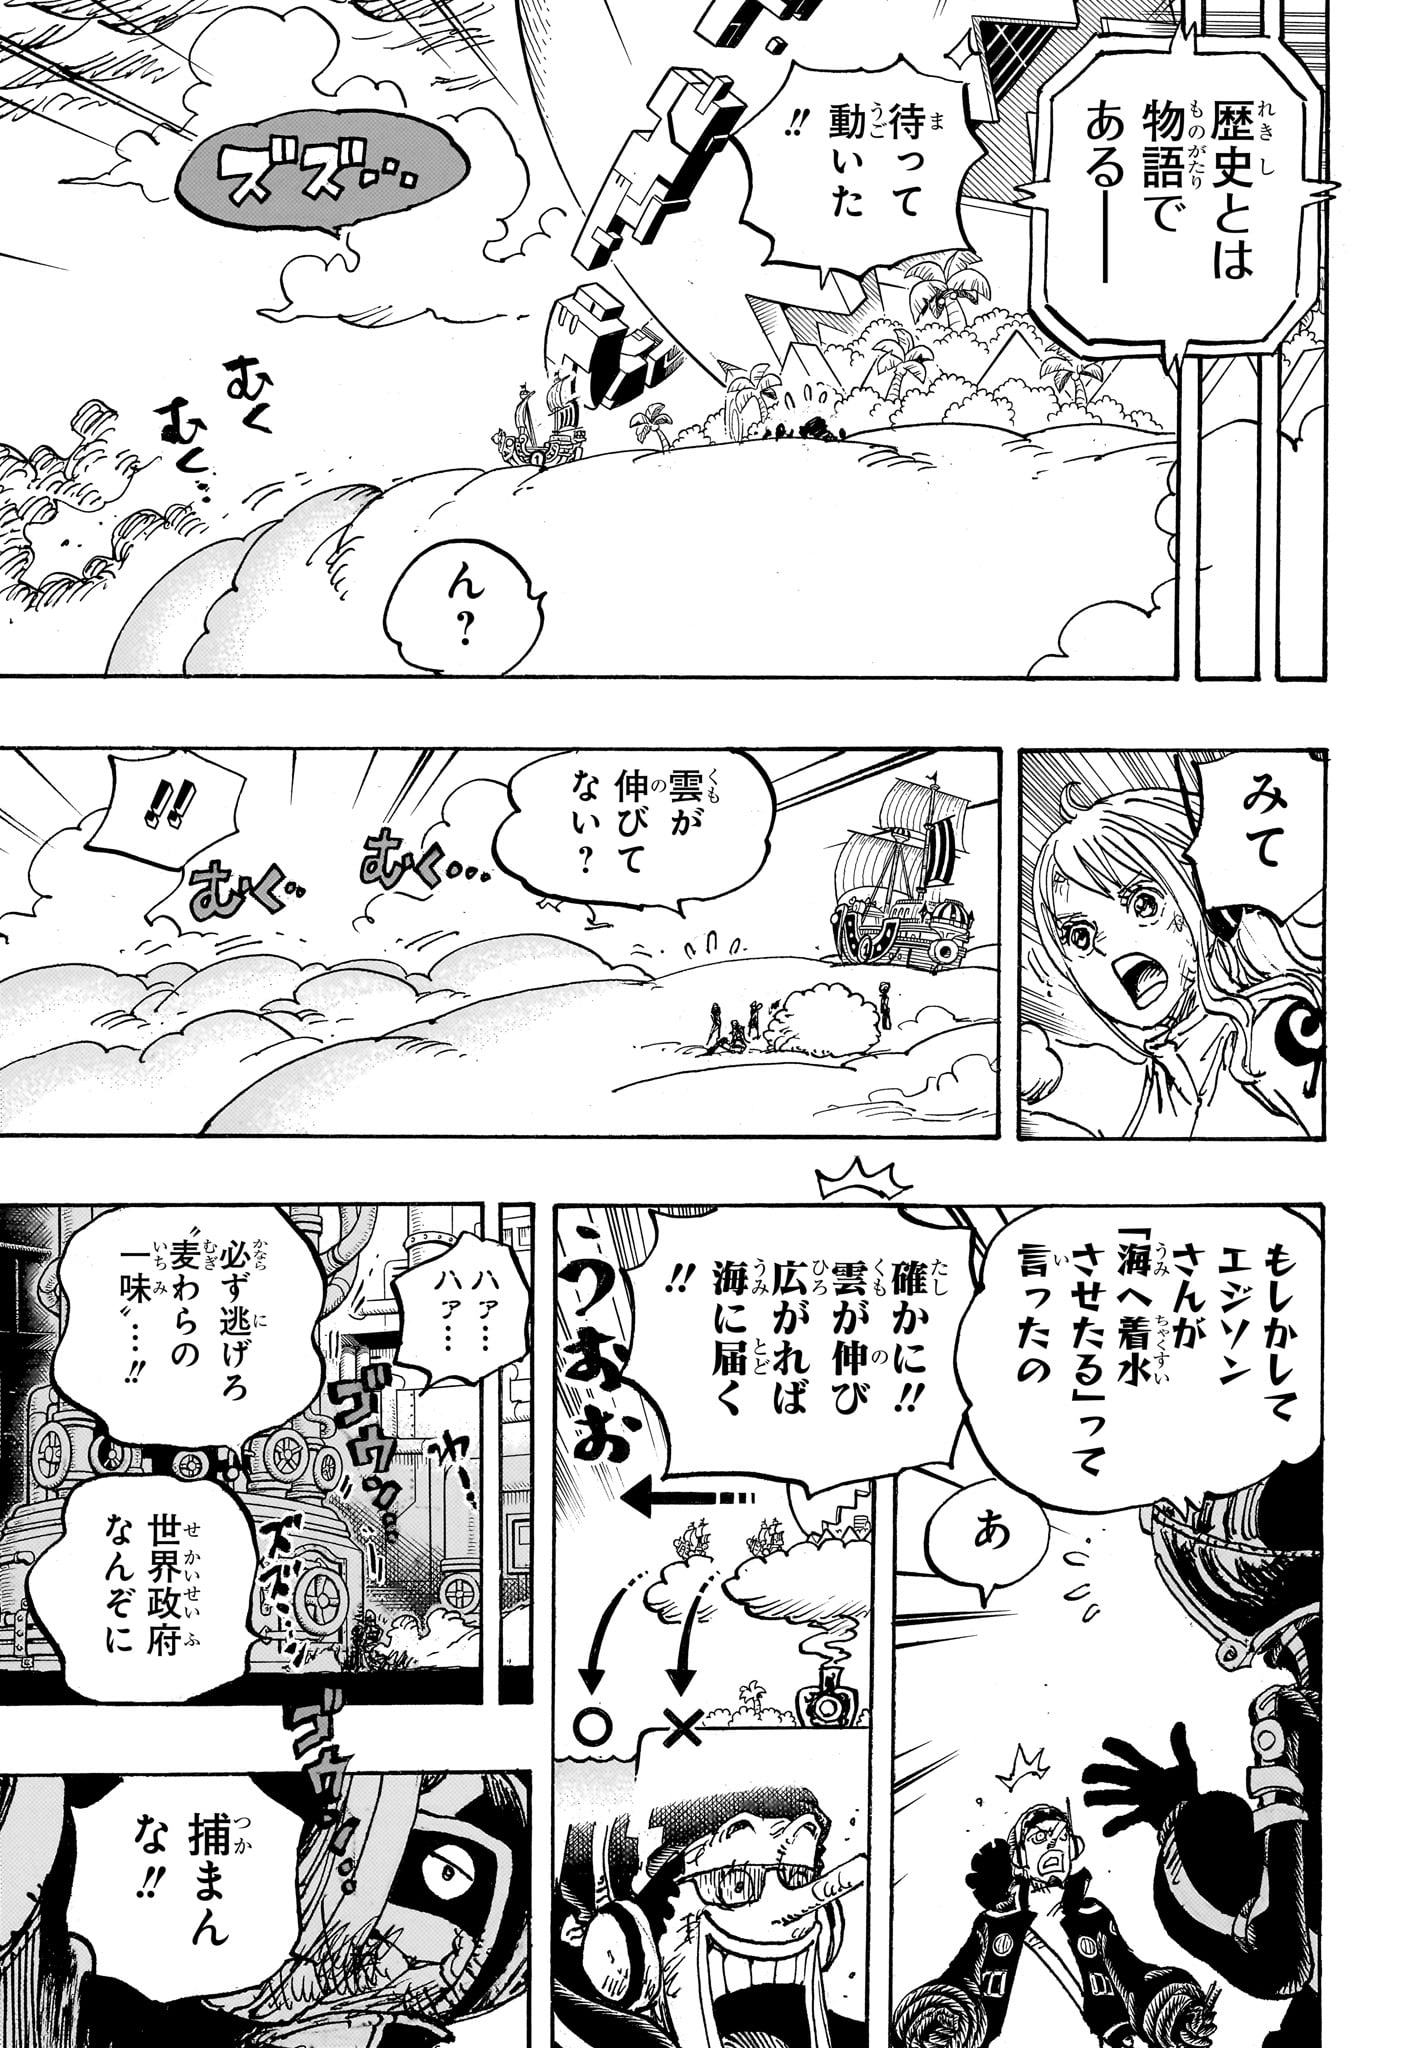 One Piece - Chapter 1114 - Page 13